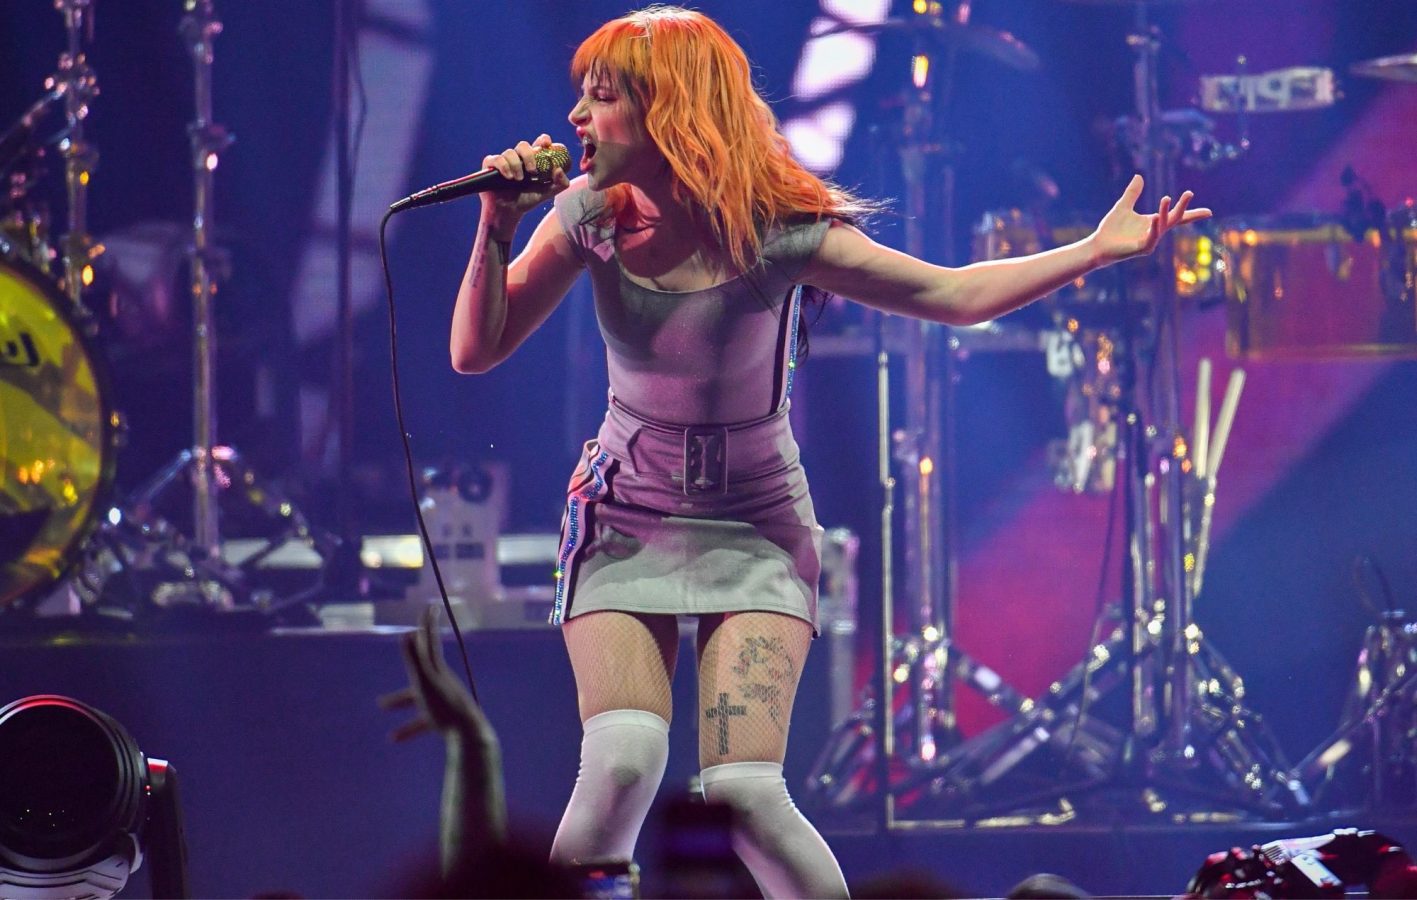 Hayley Williams Health Issue Forces Abrupt Halt to Paramore's This Is Why Tour